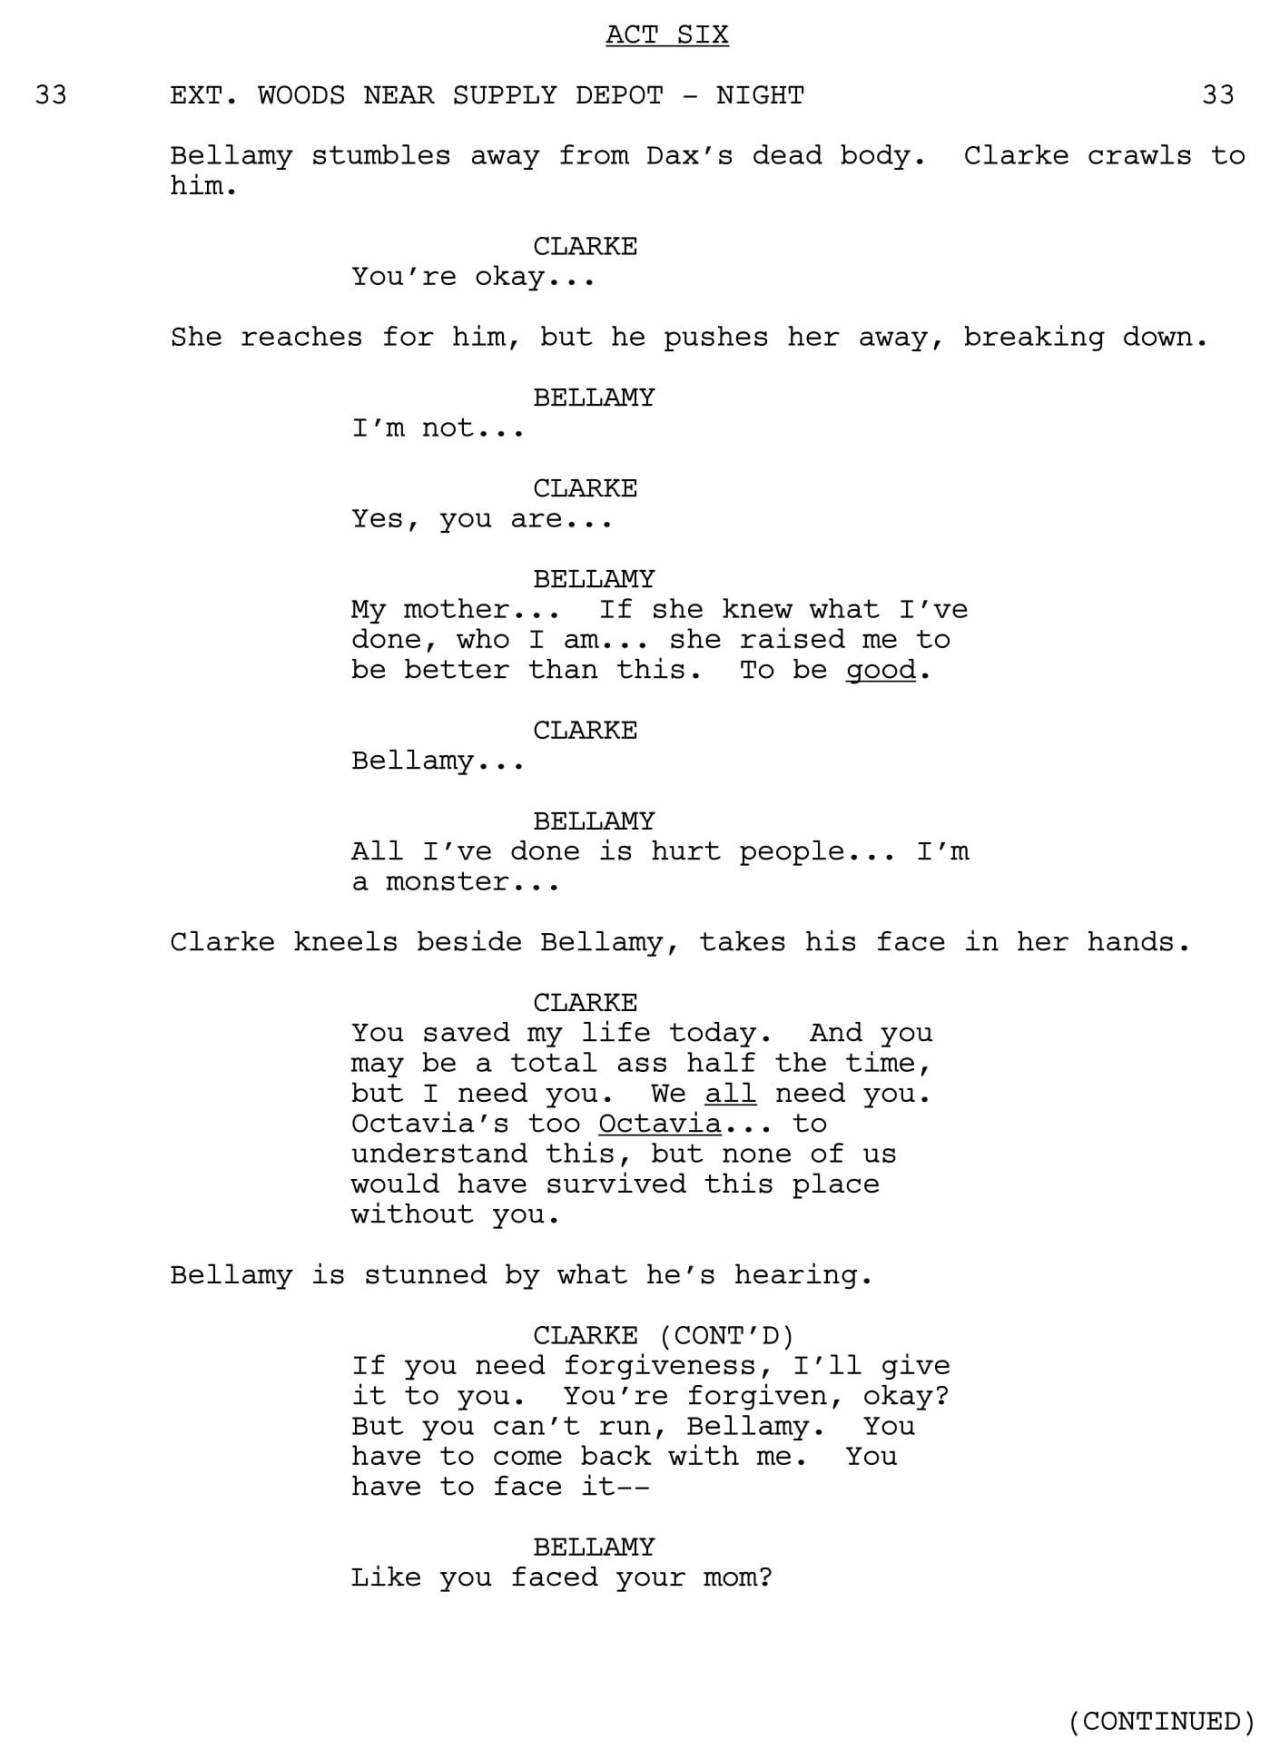 Let’s get started with the first scene from “Day Trip”, written by Elizabeth